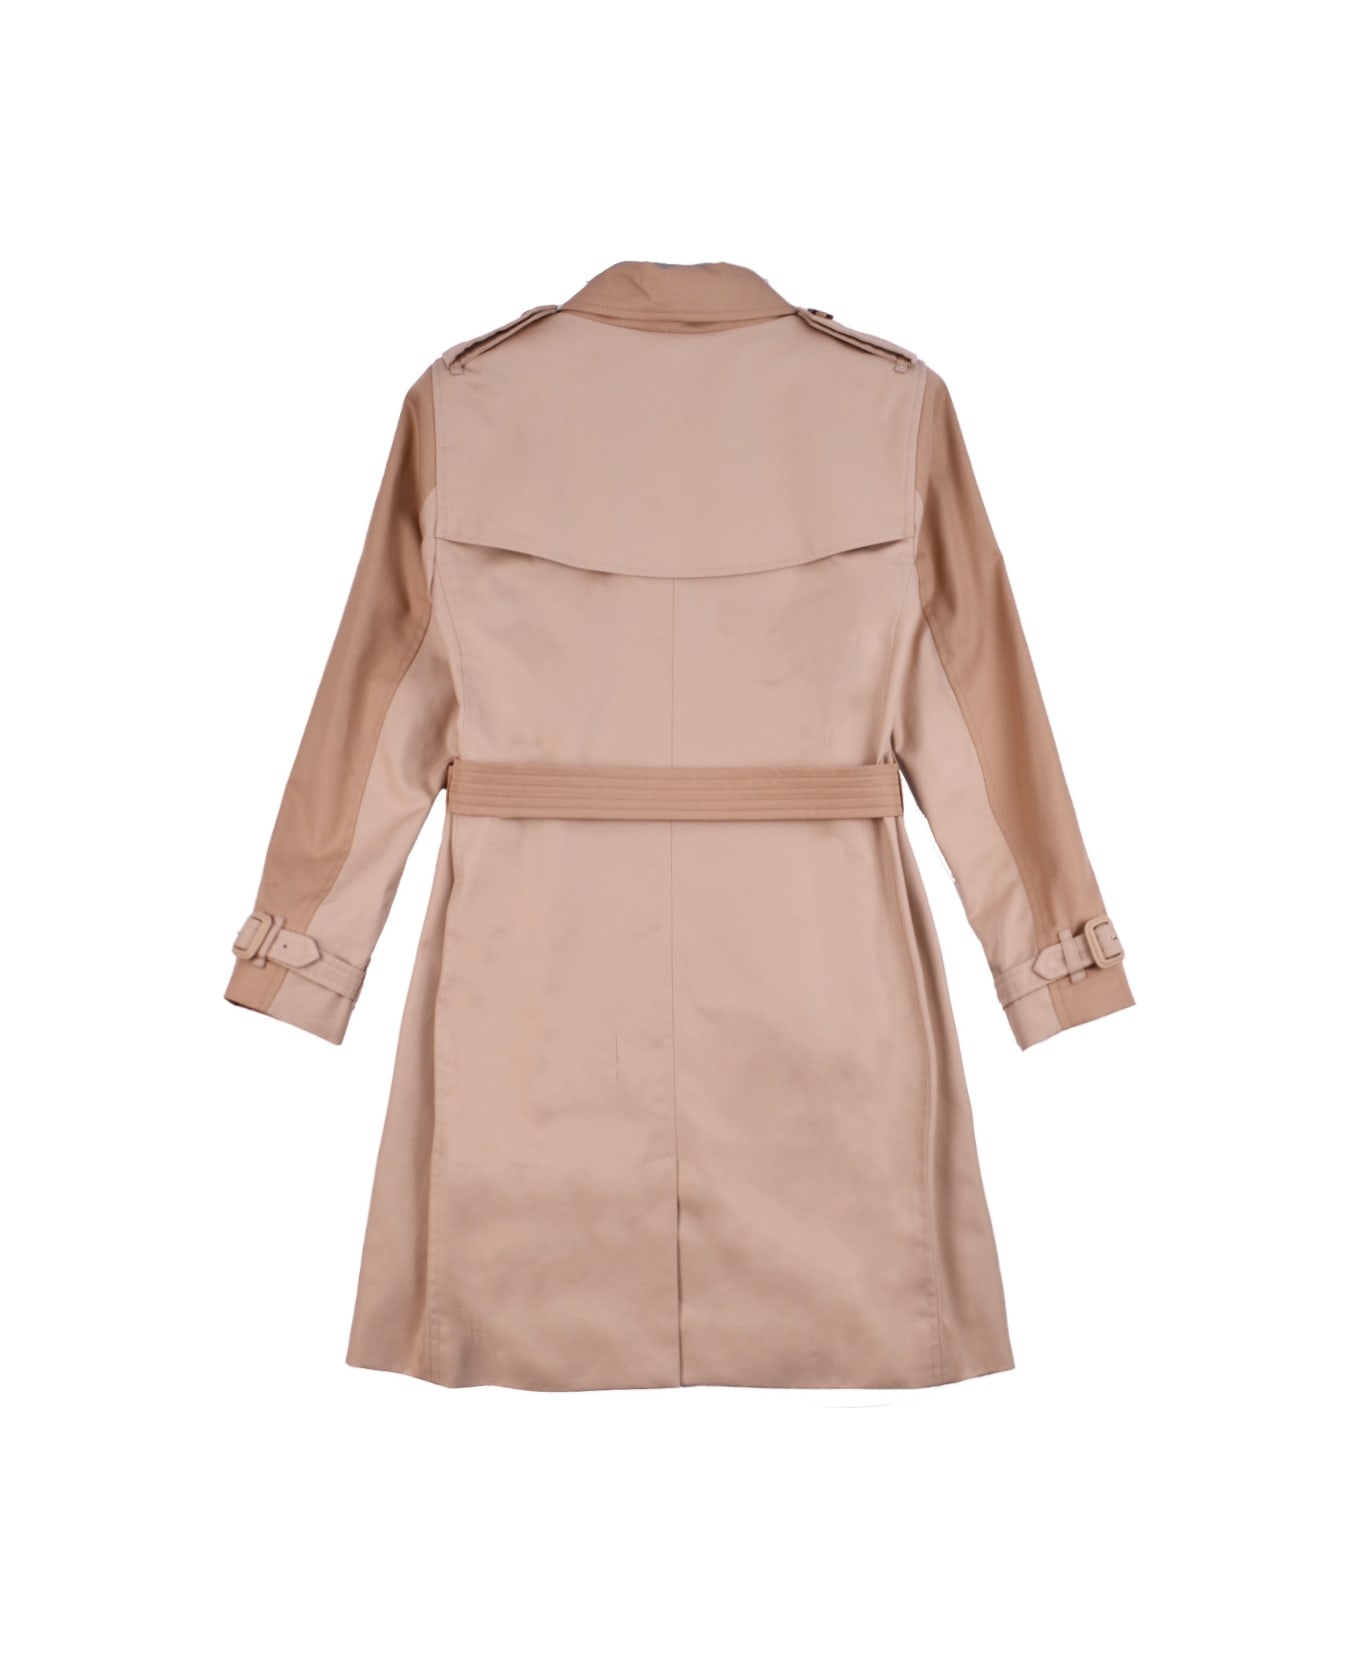 Burberry Cotton Trench - Beige